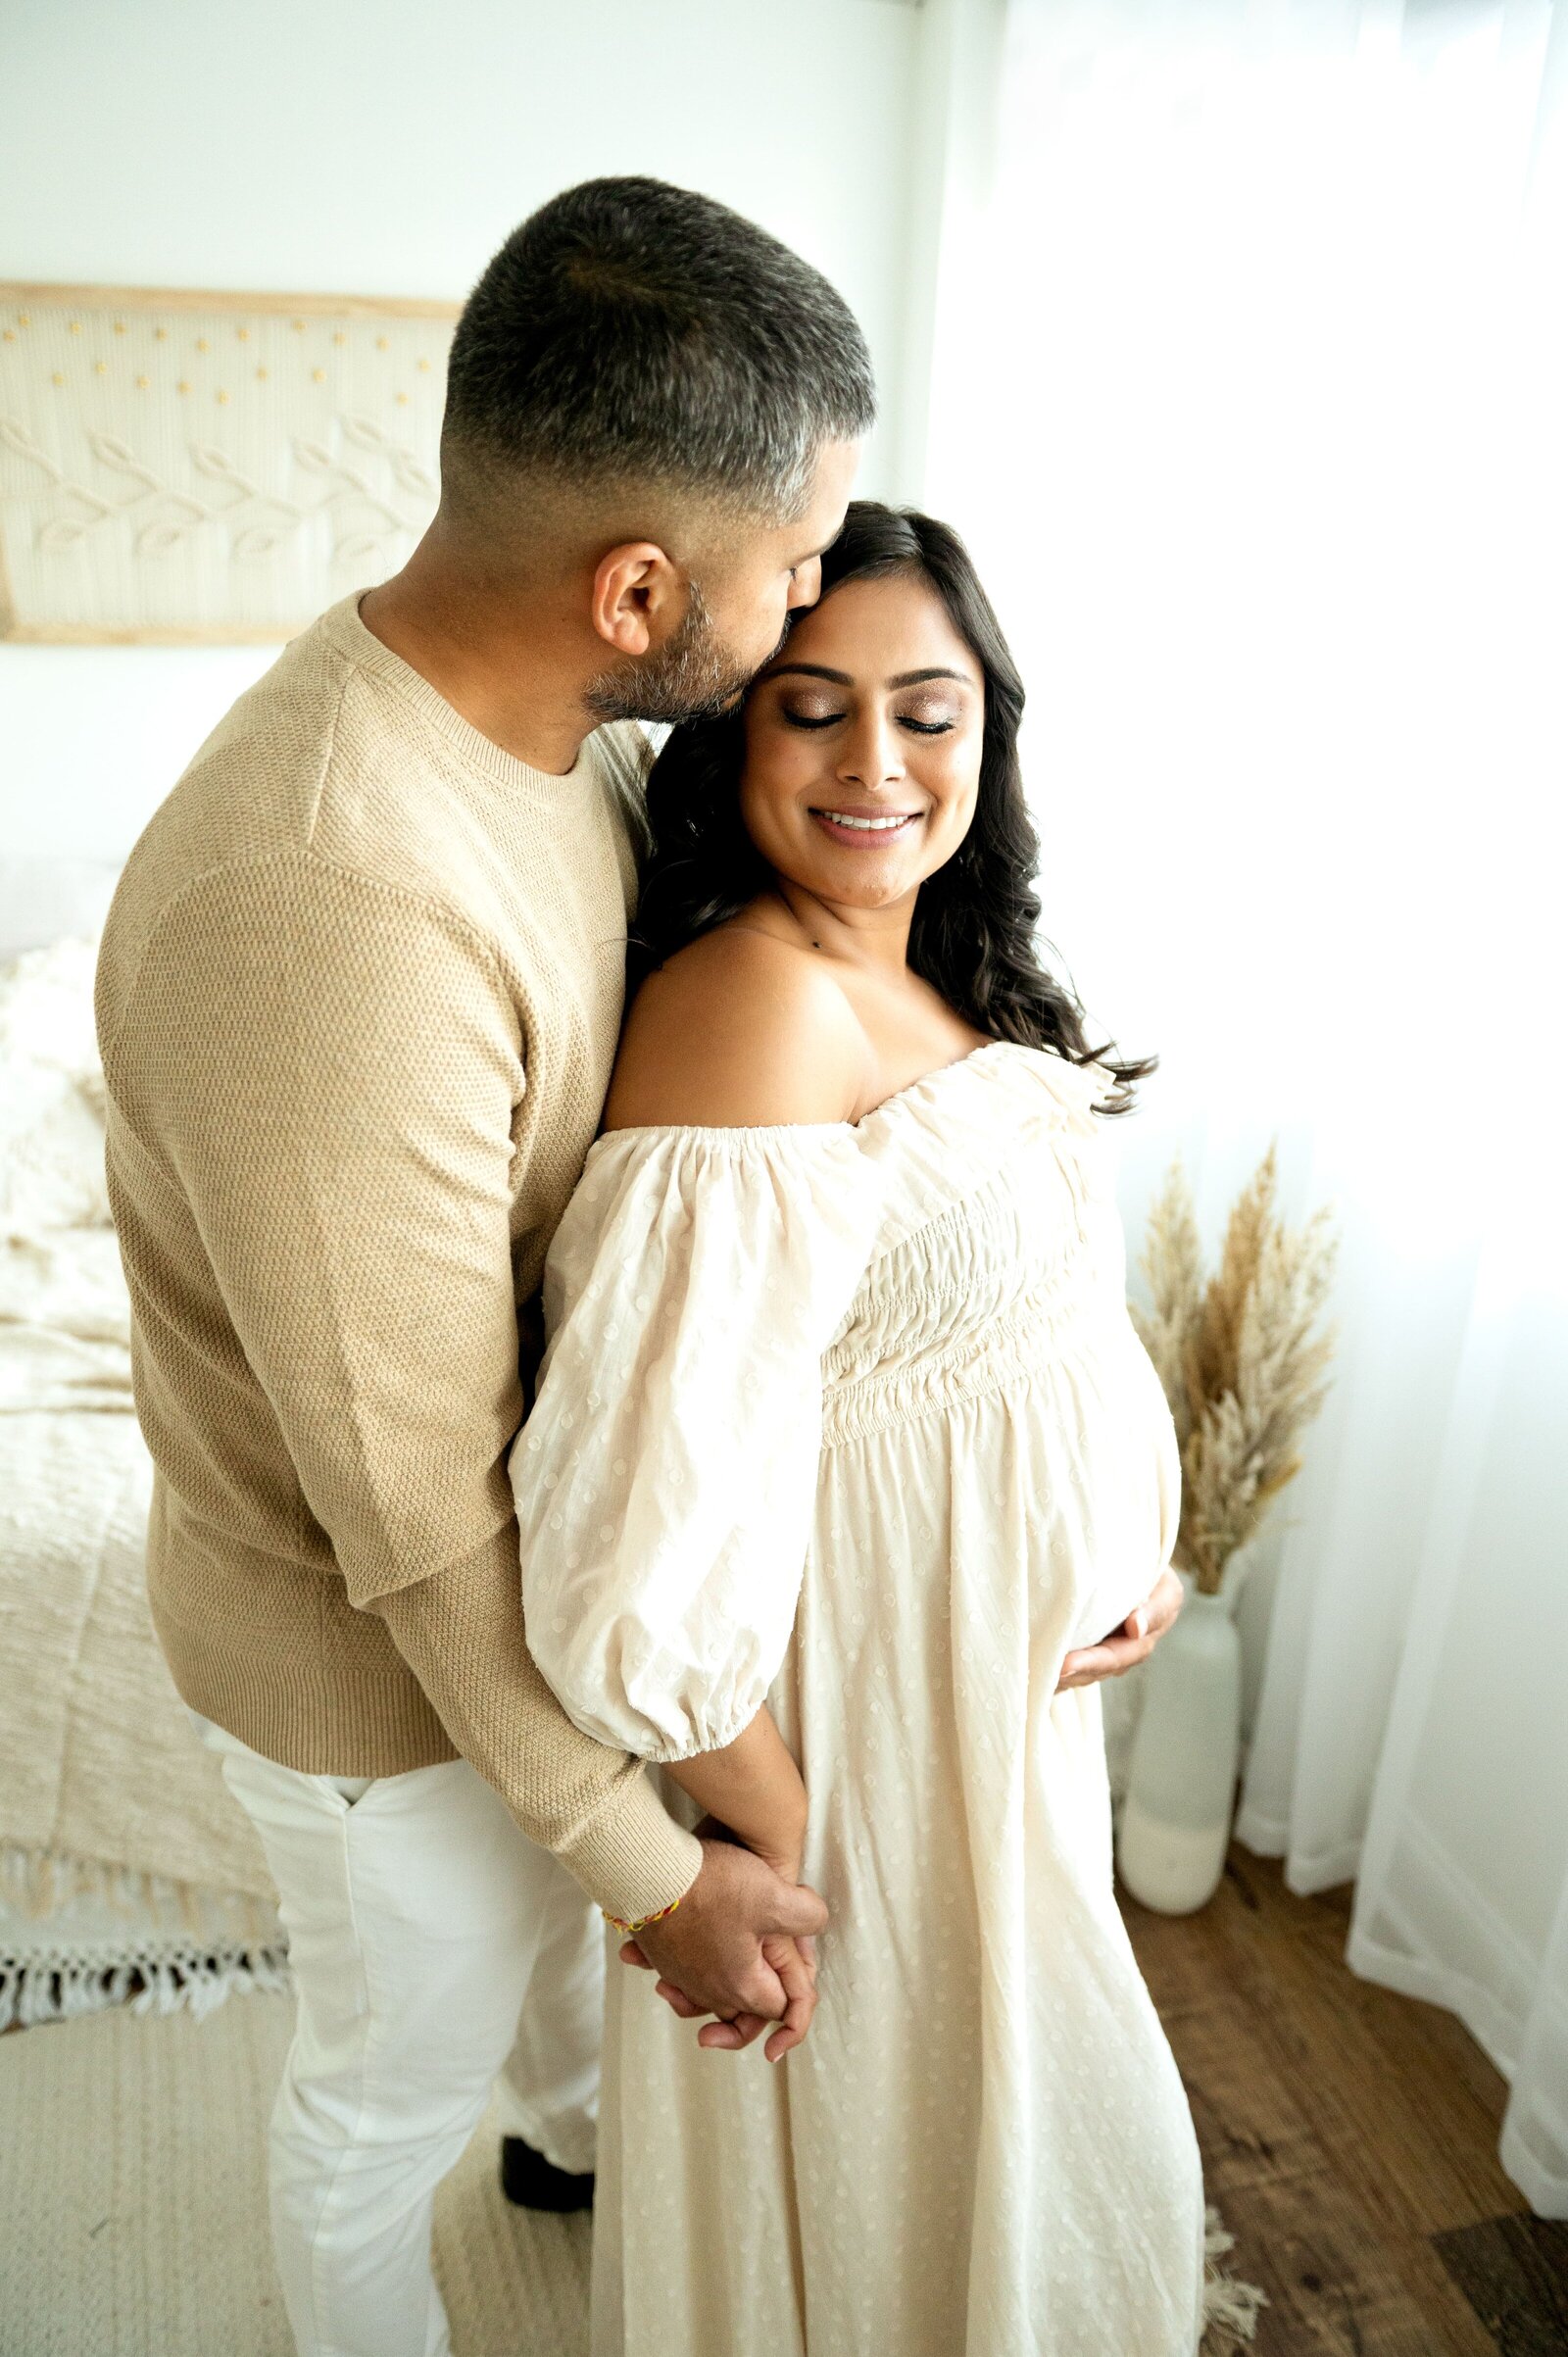 pregannt woman in a cream dress with her husband doing maternity photo